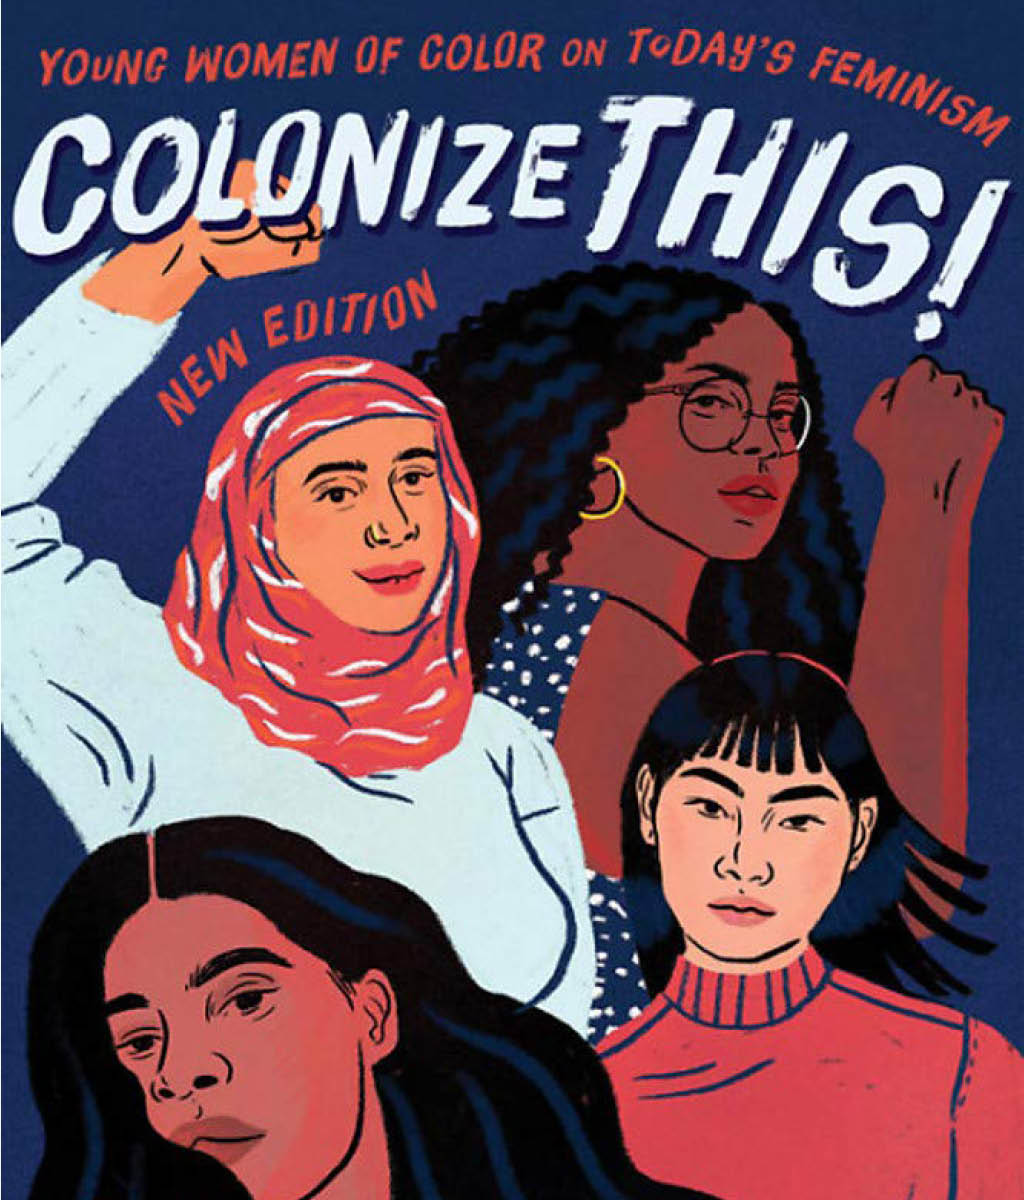 Colonize This!: Young Women of Colour on Today&#39;s Feminism by Bushra Rehman and Daisy Hernandez